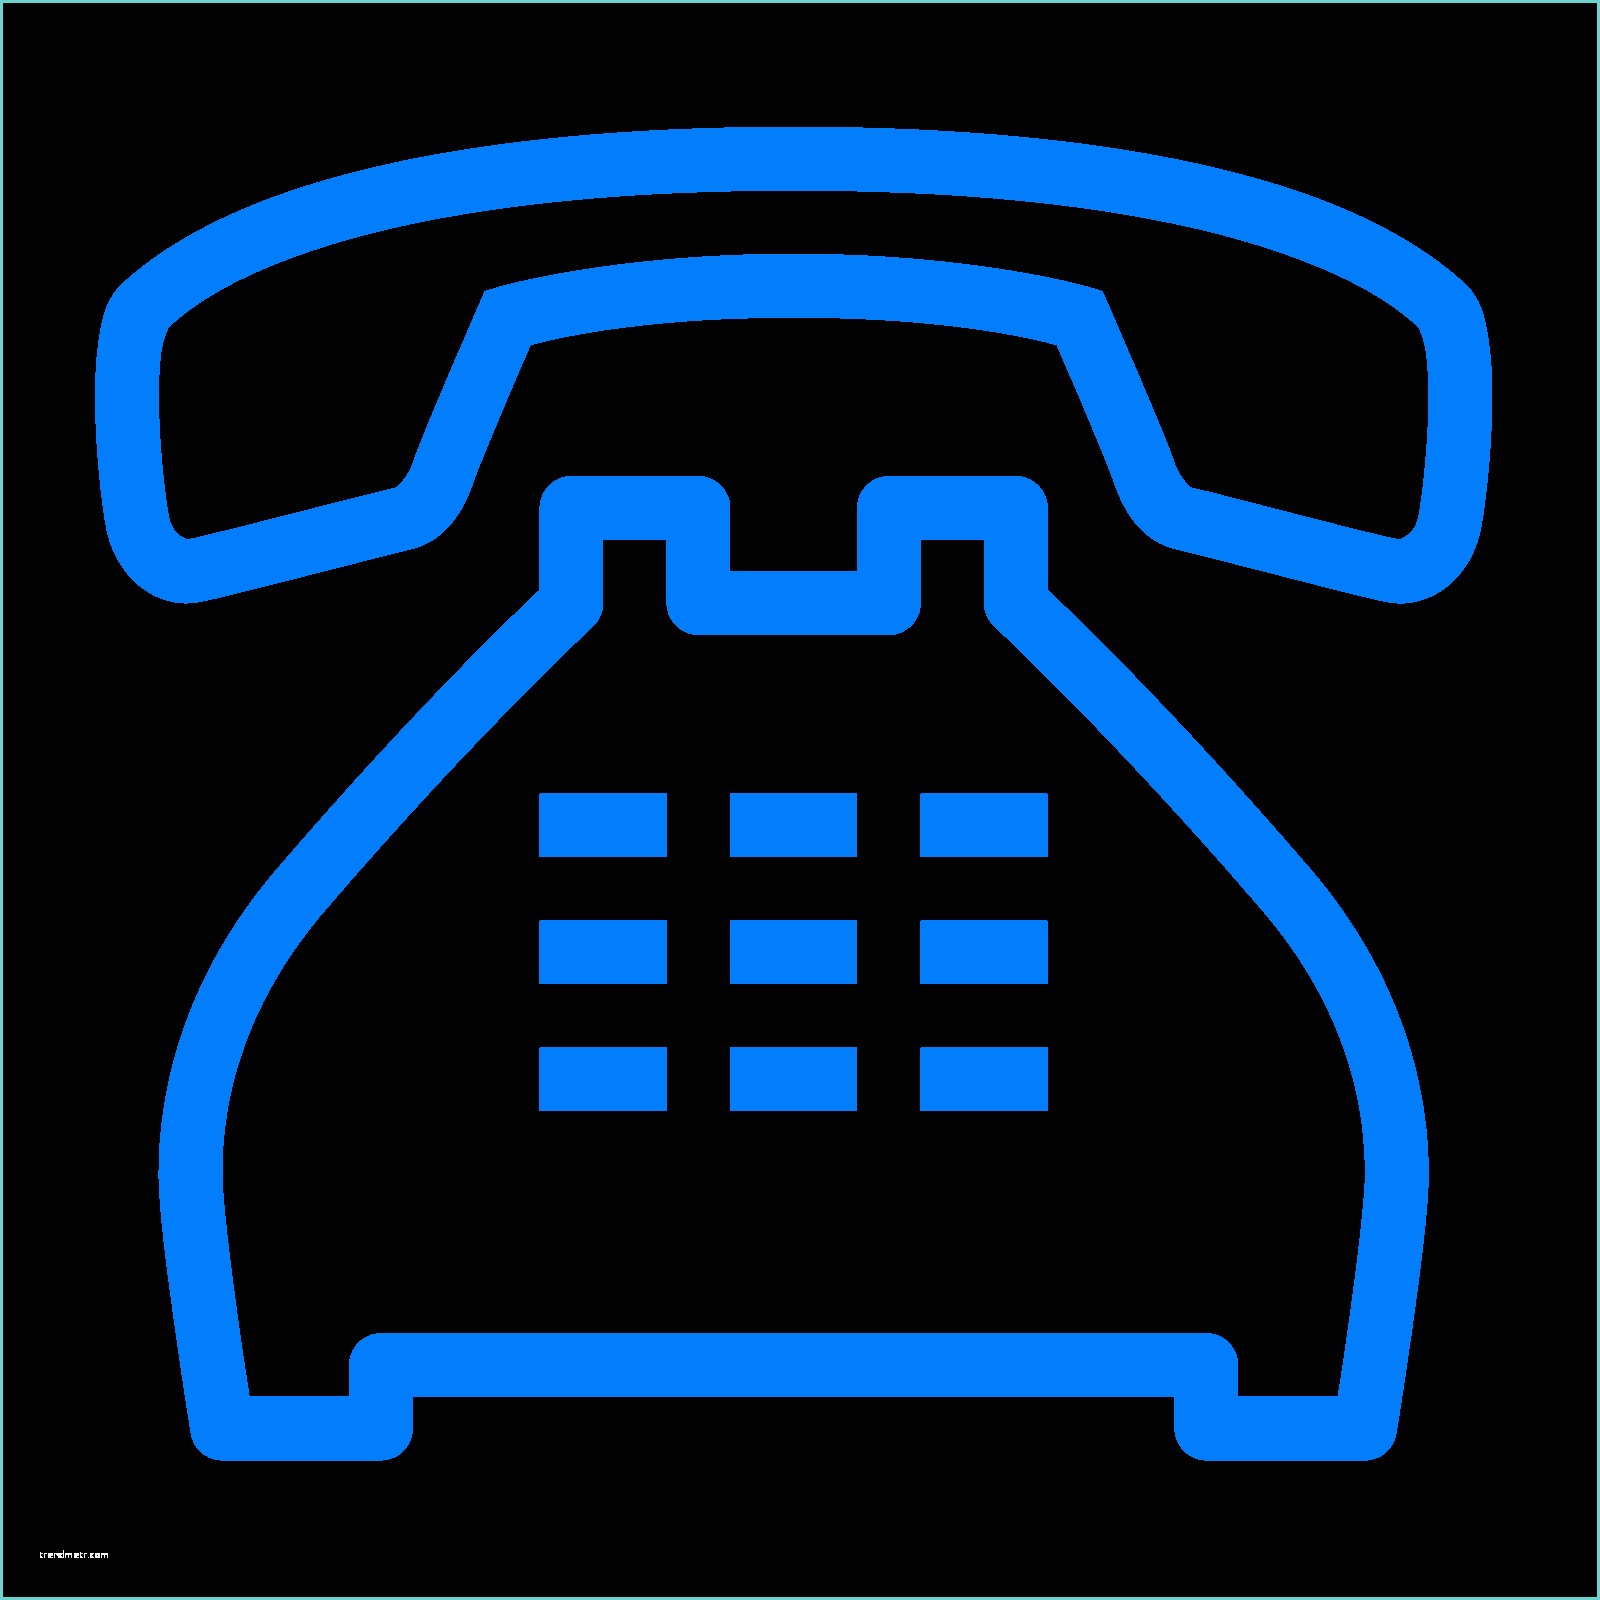 Icono De Telefono De Casa Phone Icons Download for Free In Png and Svg